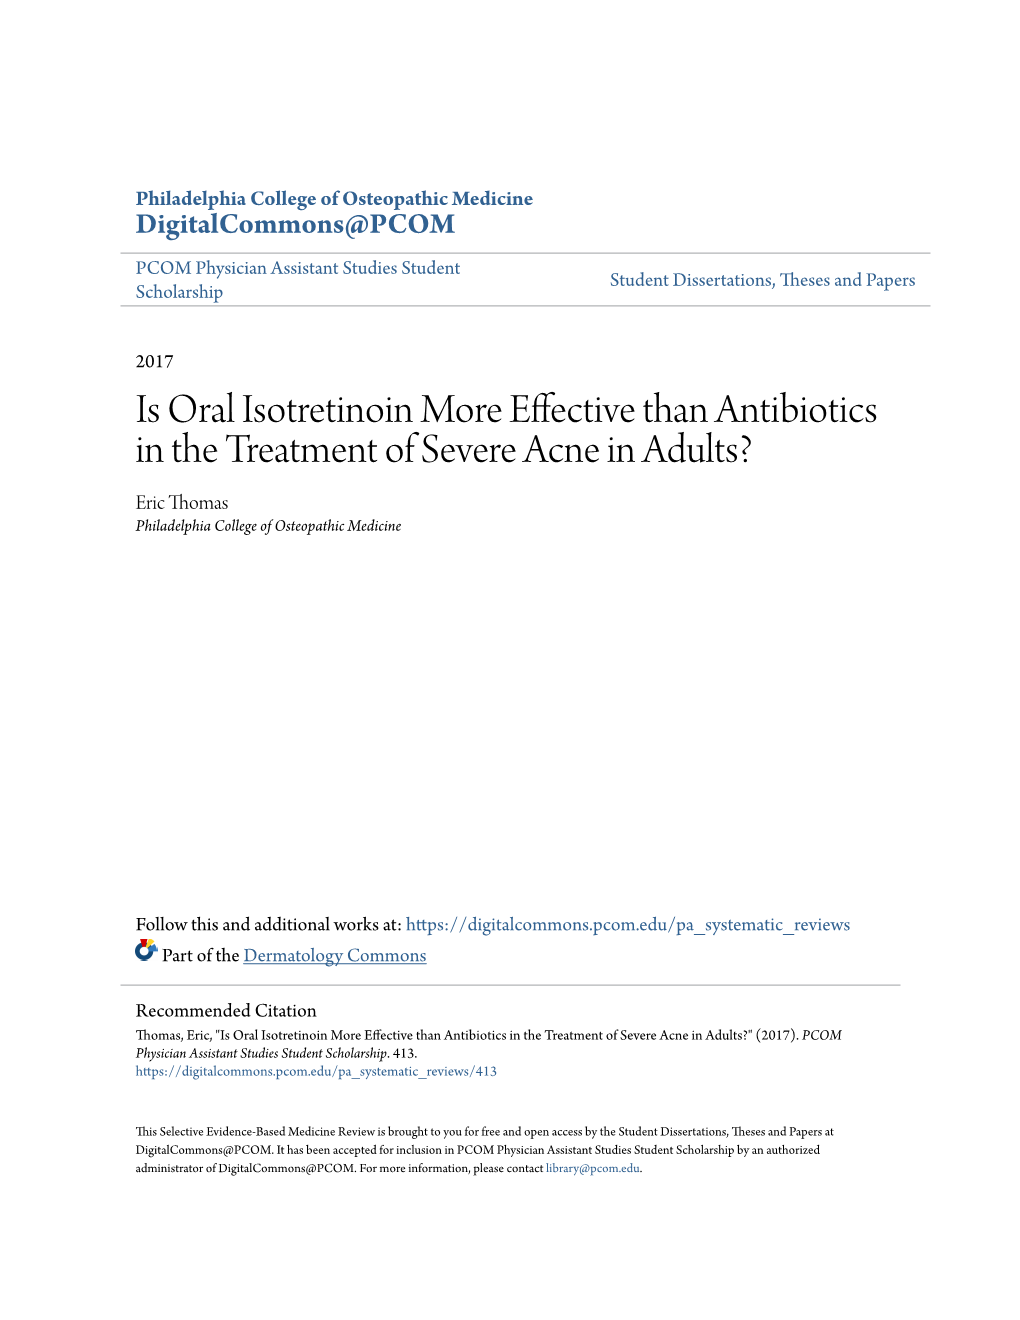 Is Oral Isotretinoin More Effective Than Antibiotics in the Treatment of Severe Acne in Adults? Eric Thomas Philadelphia College of Osteopathic Medicine